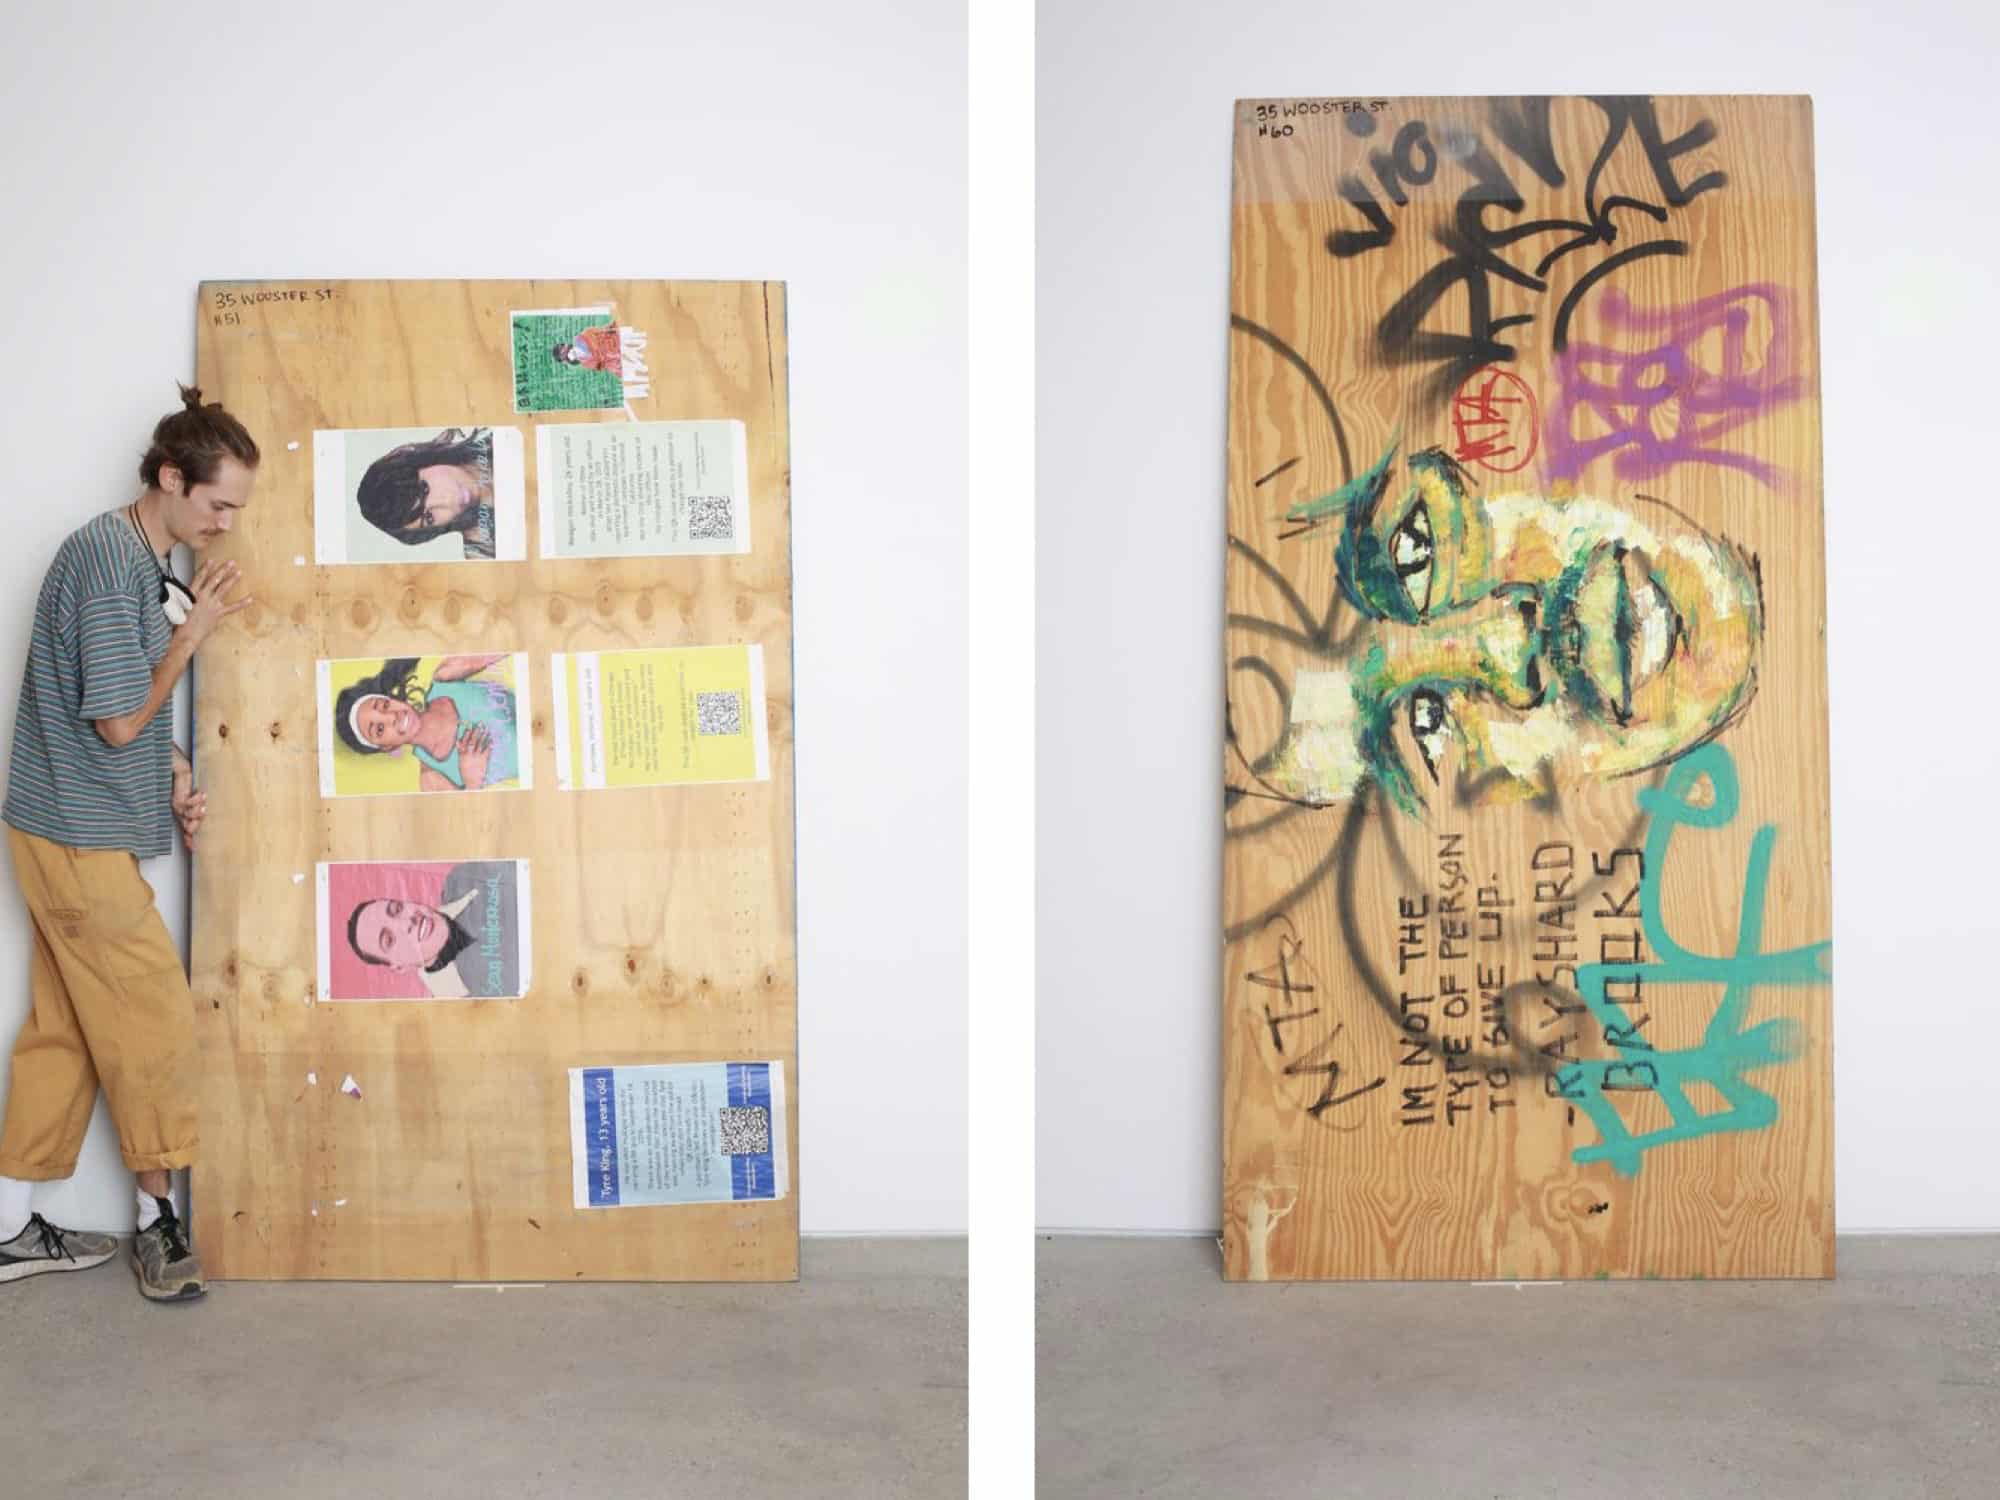 Plywood from New York Storefronts Repurposed Into Art, and Other News